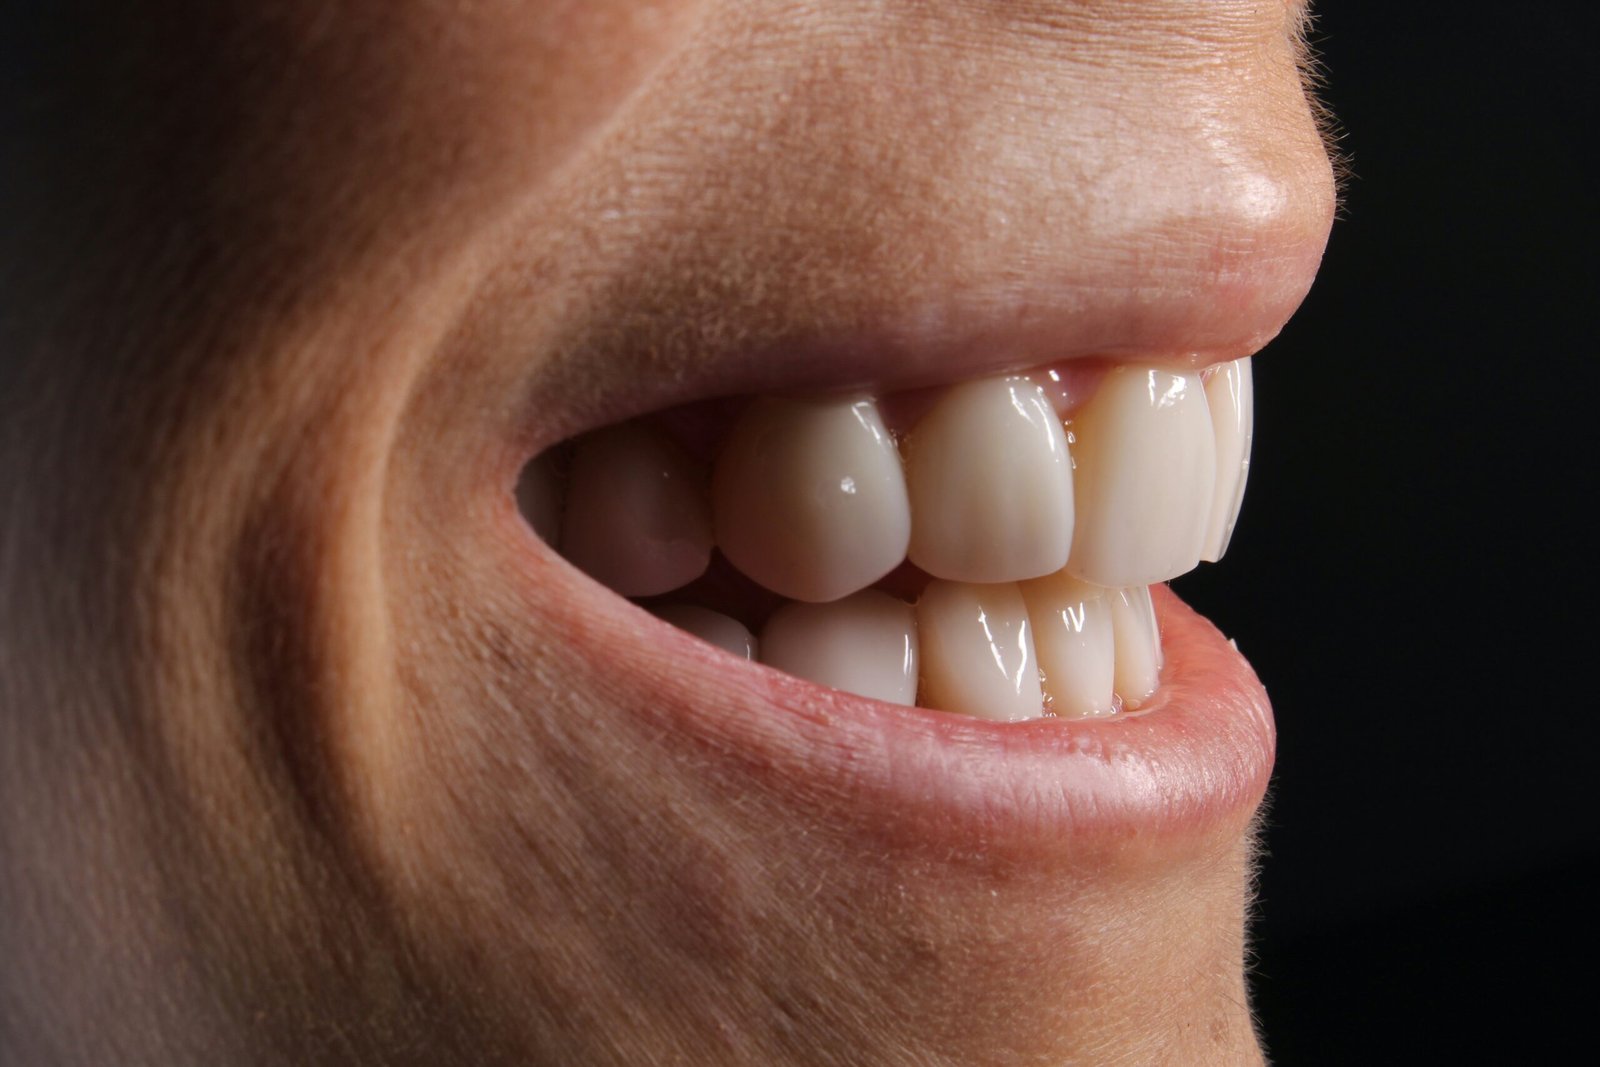 a close up of a person's mouth